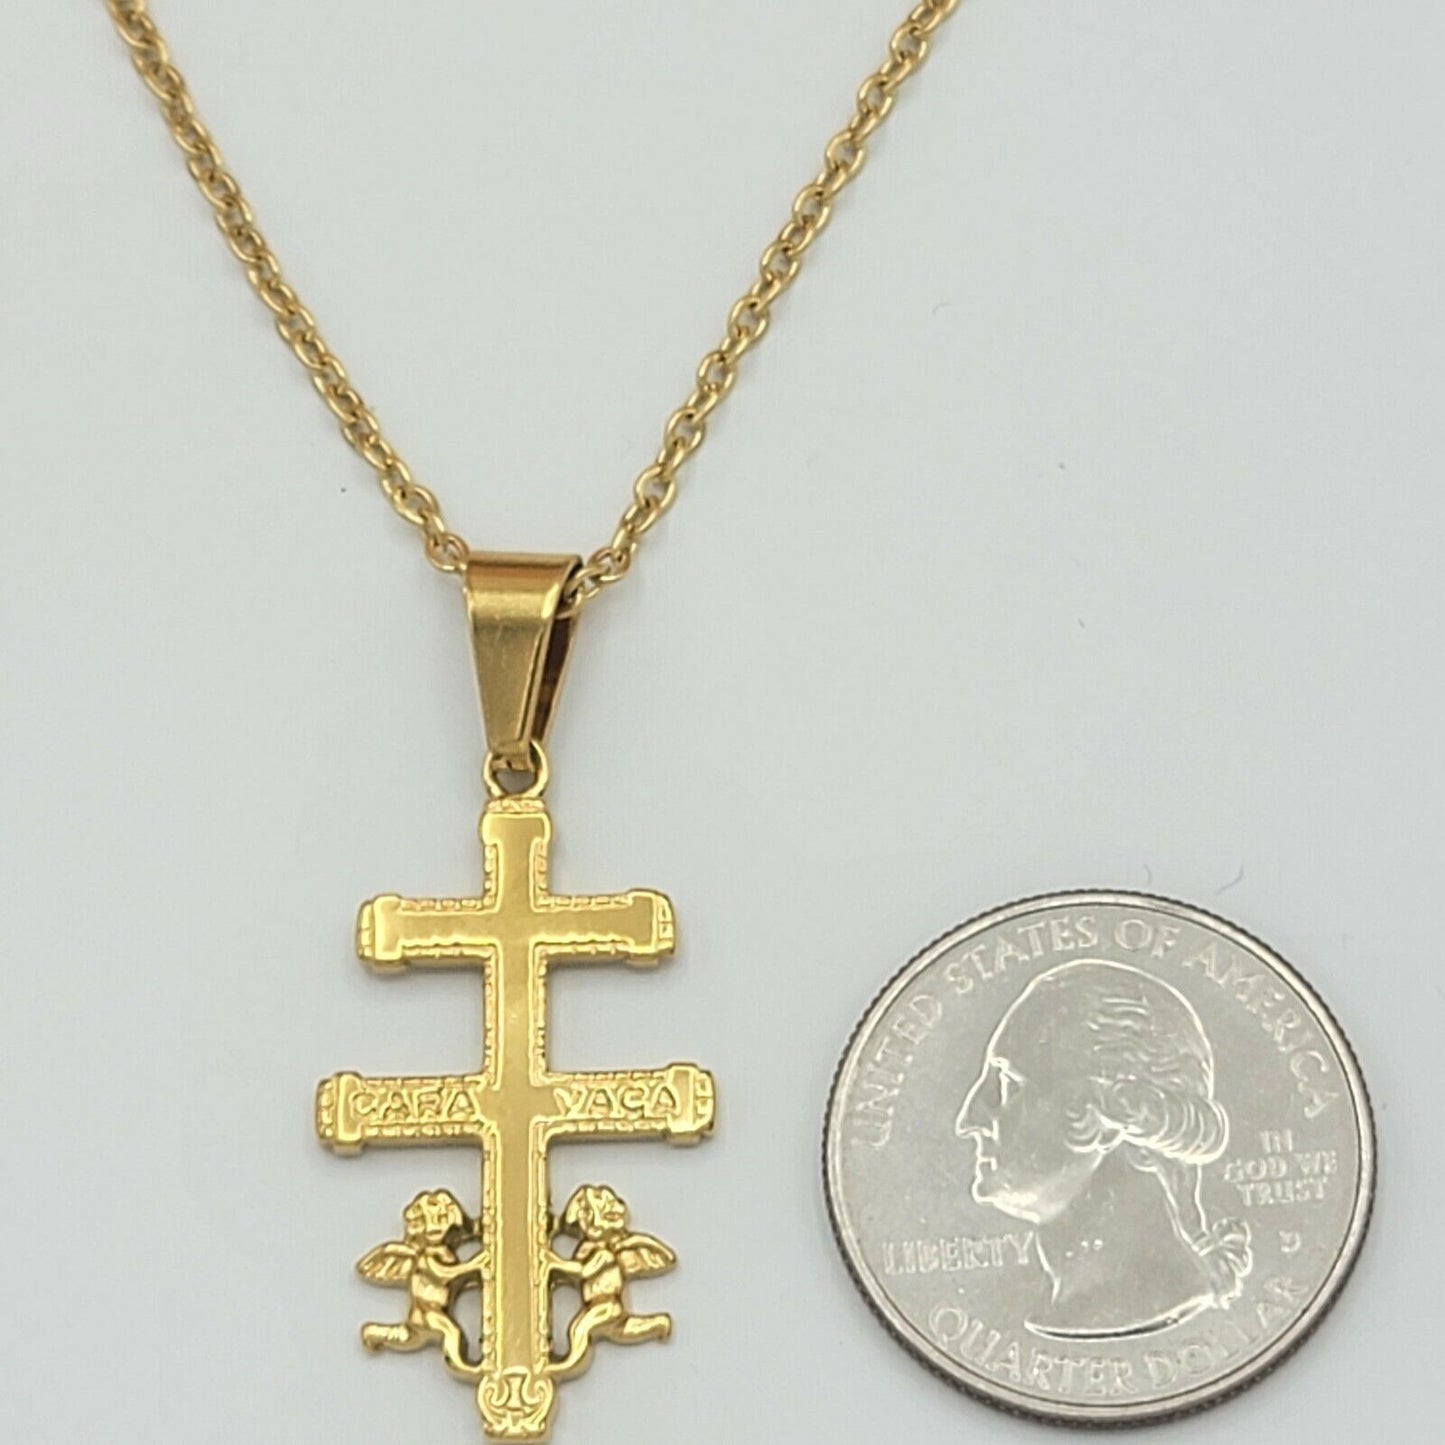 Necklaces - Stainless Steel Gold Plated. Crucifix CARAVACA Cross Pendant & Chain.